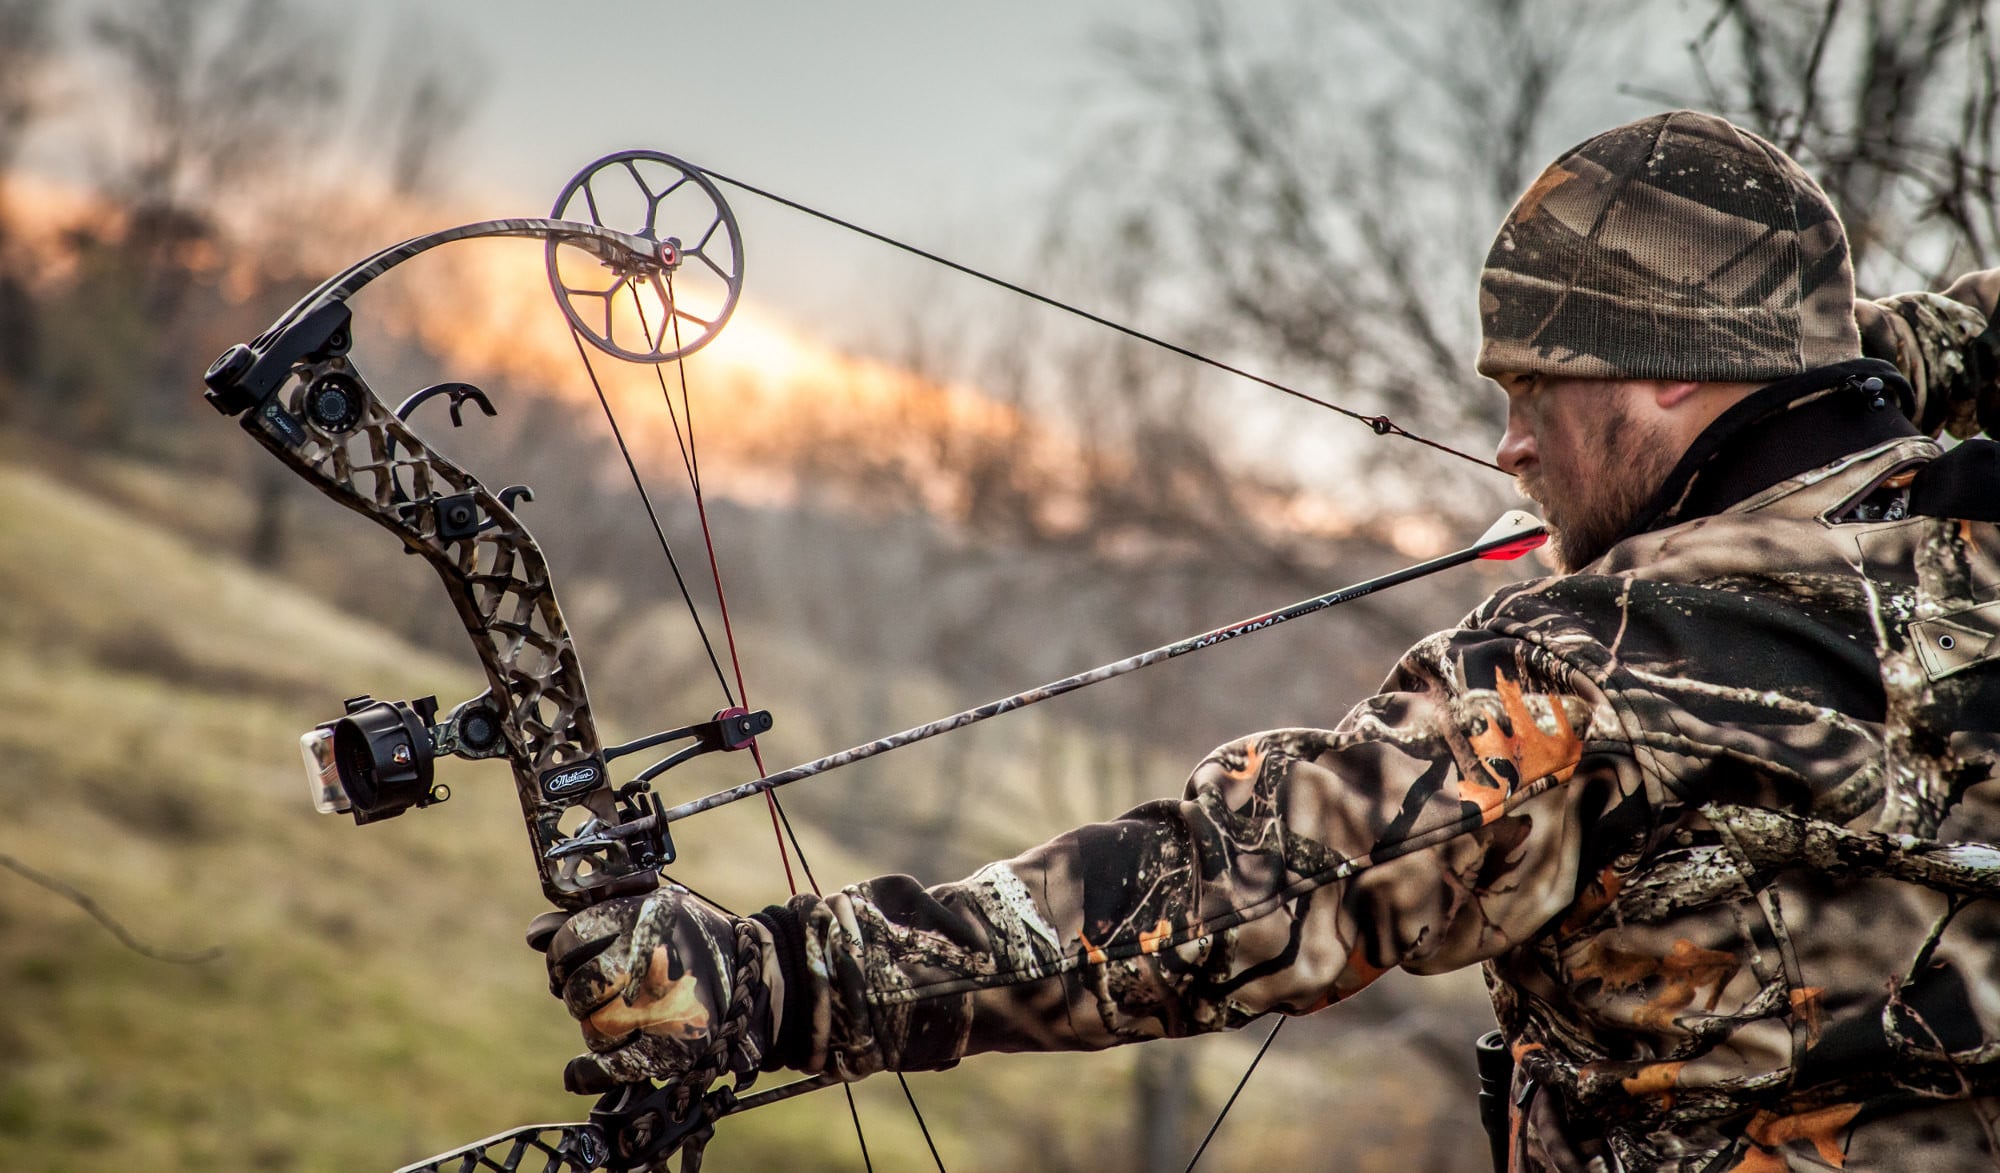 How to String a Compound Bow Expert Guide